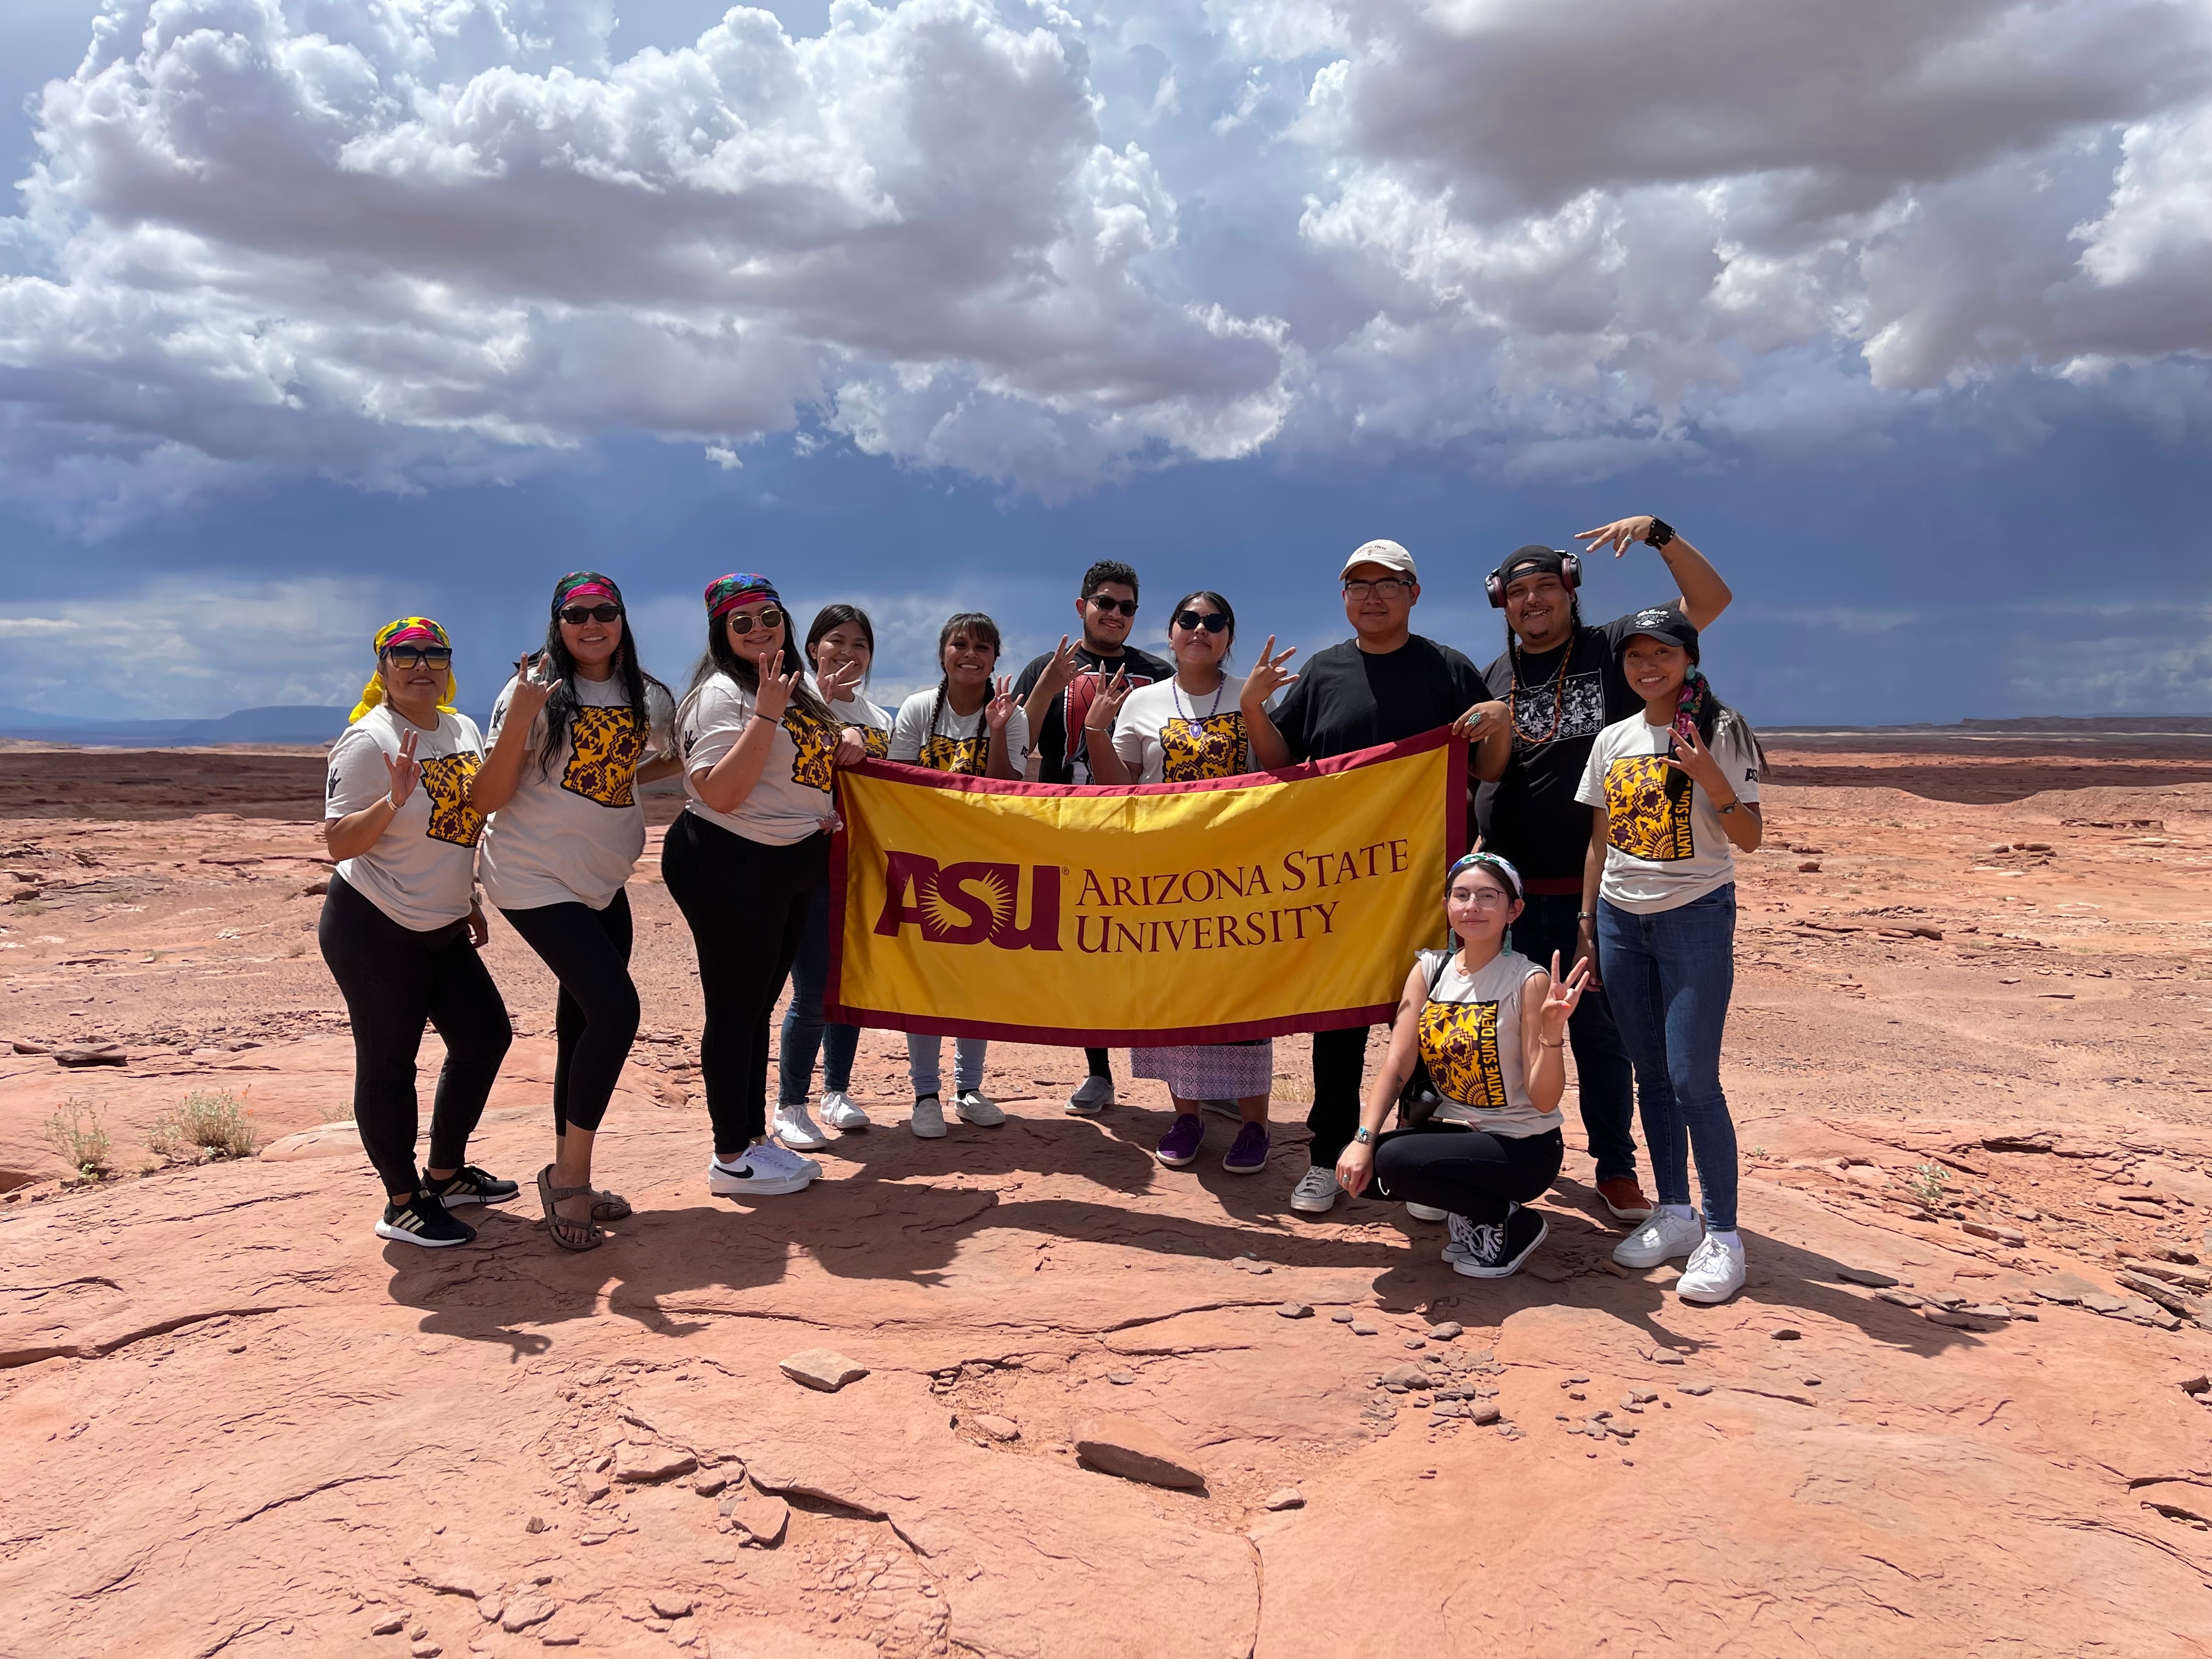 Group of students outside in desert wearing "native sun devil" shirts and holding ASU banner